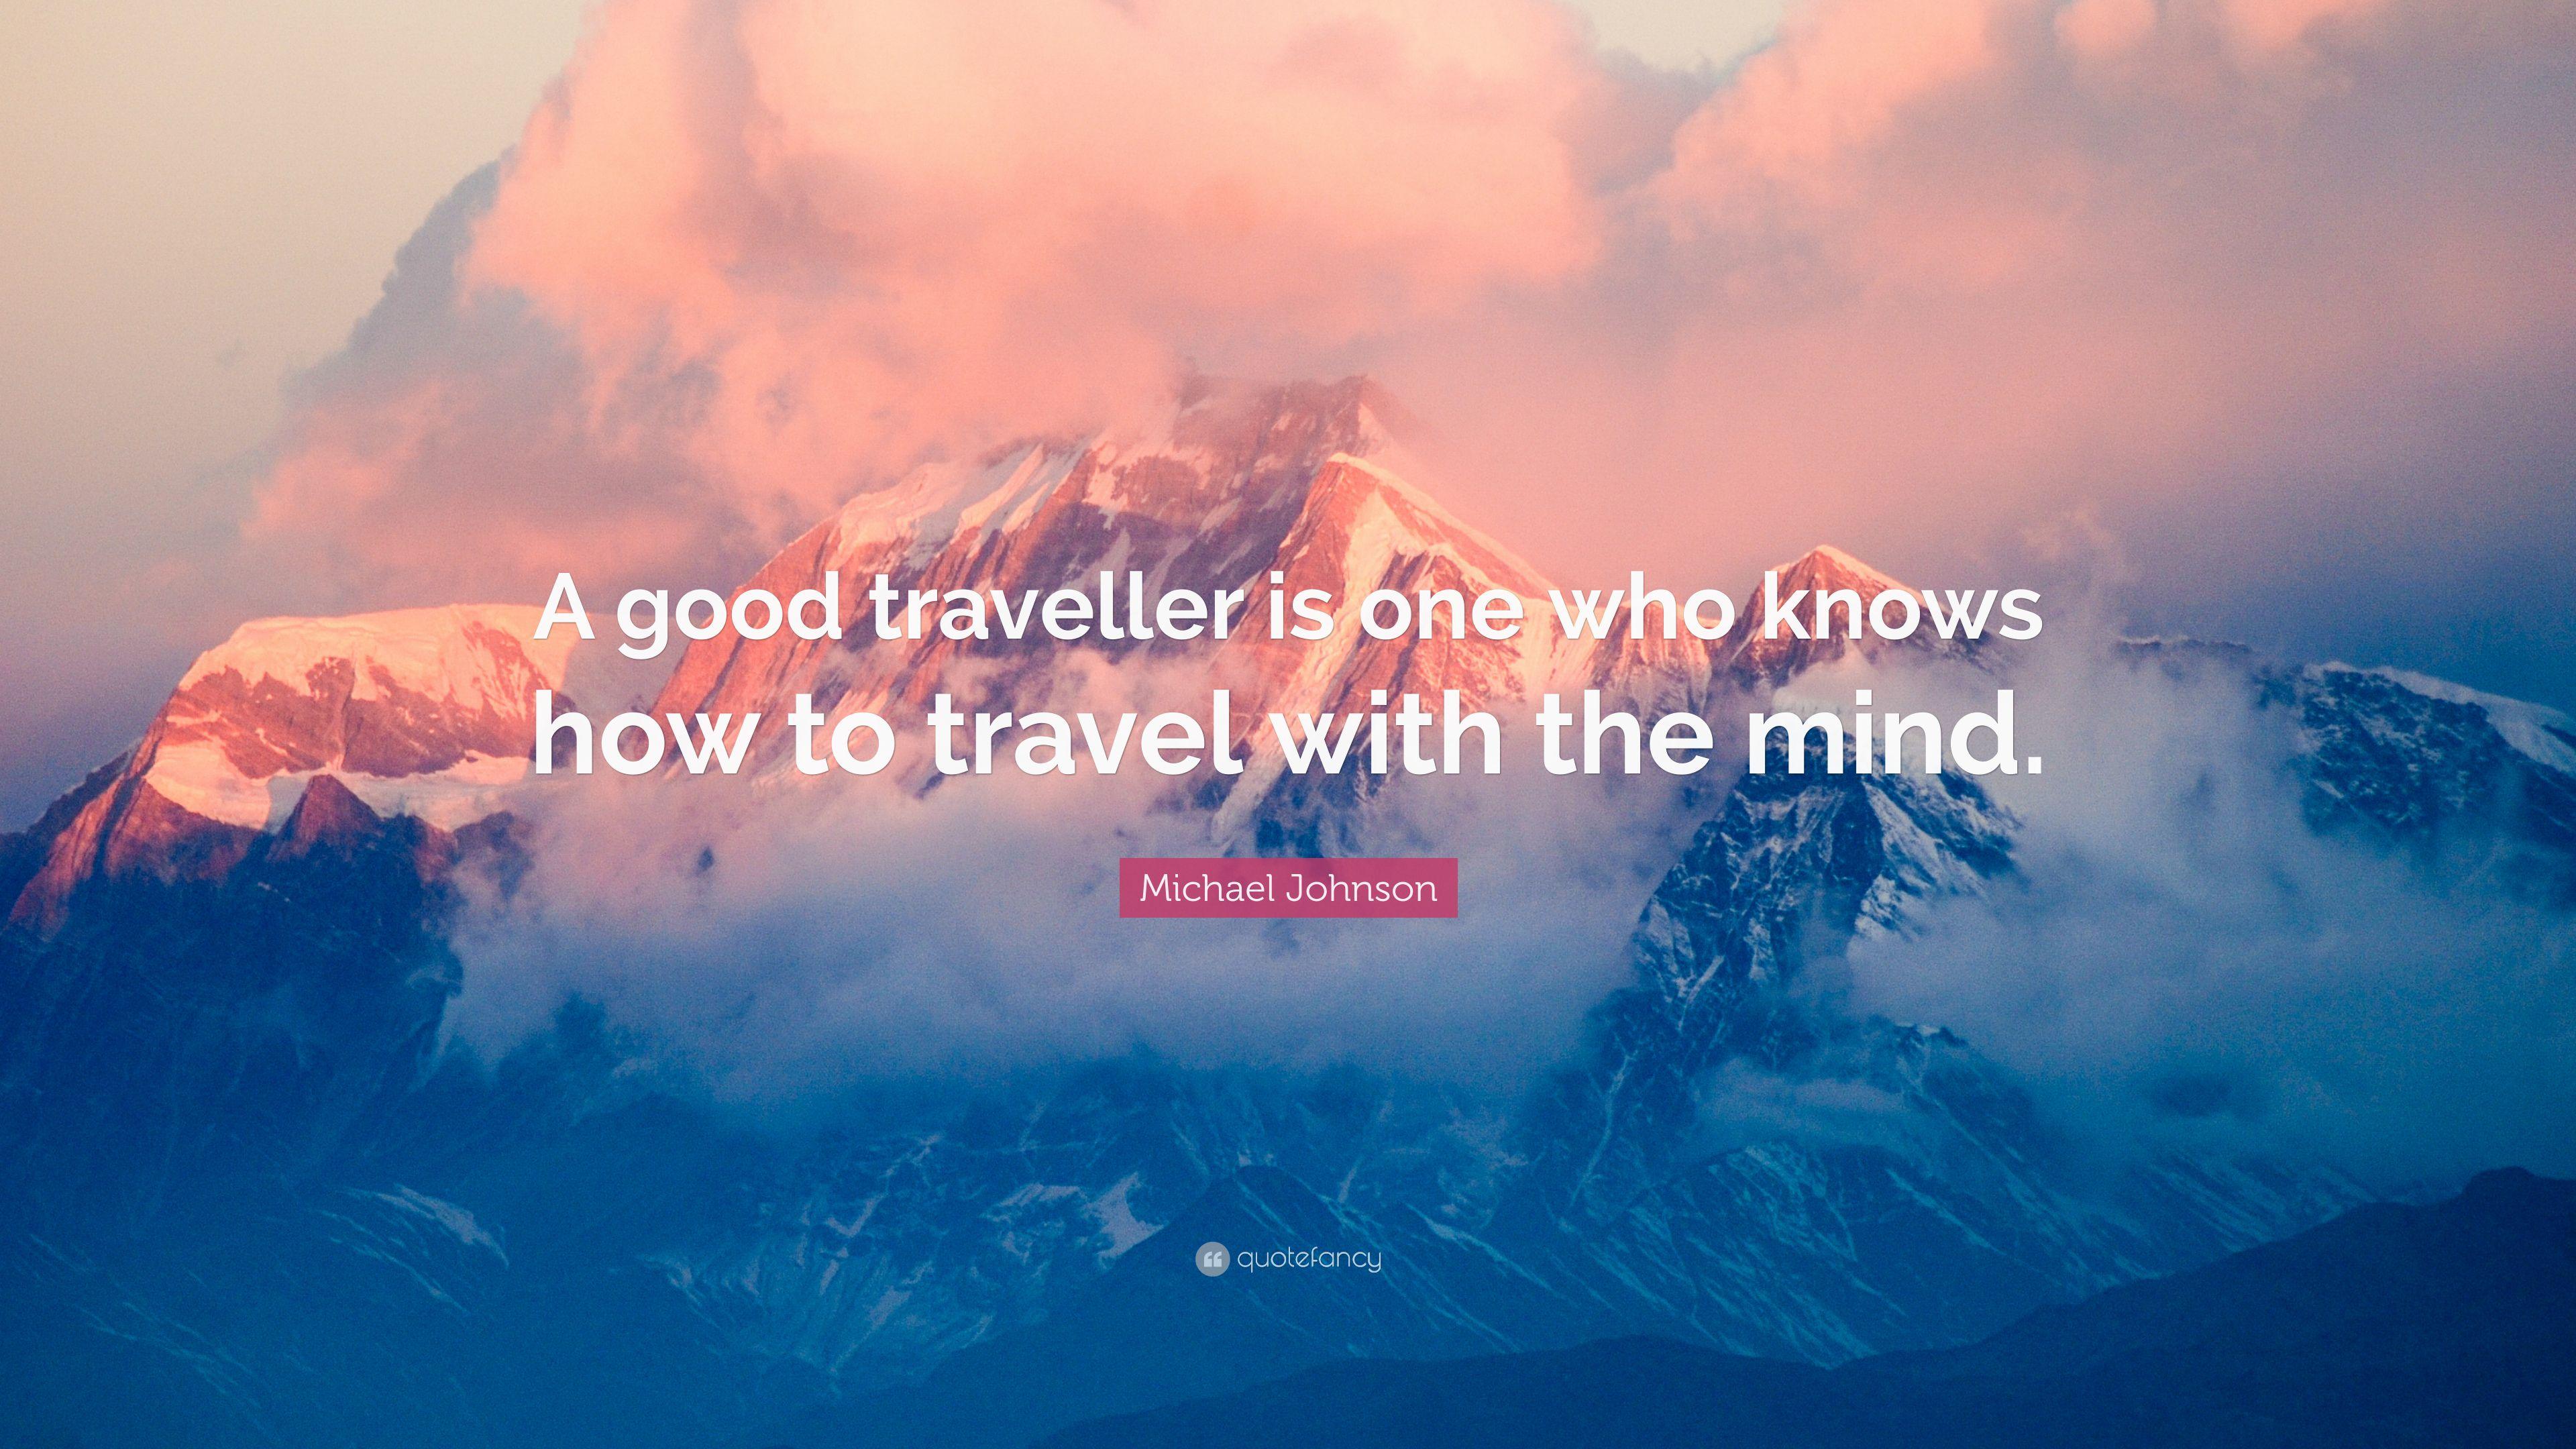 Michael Johnson Quote: “A good traveller is one who knows how to